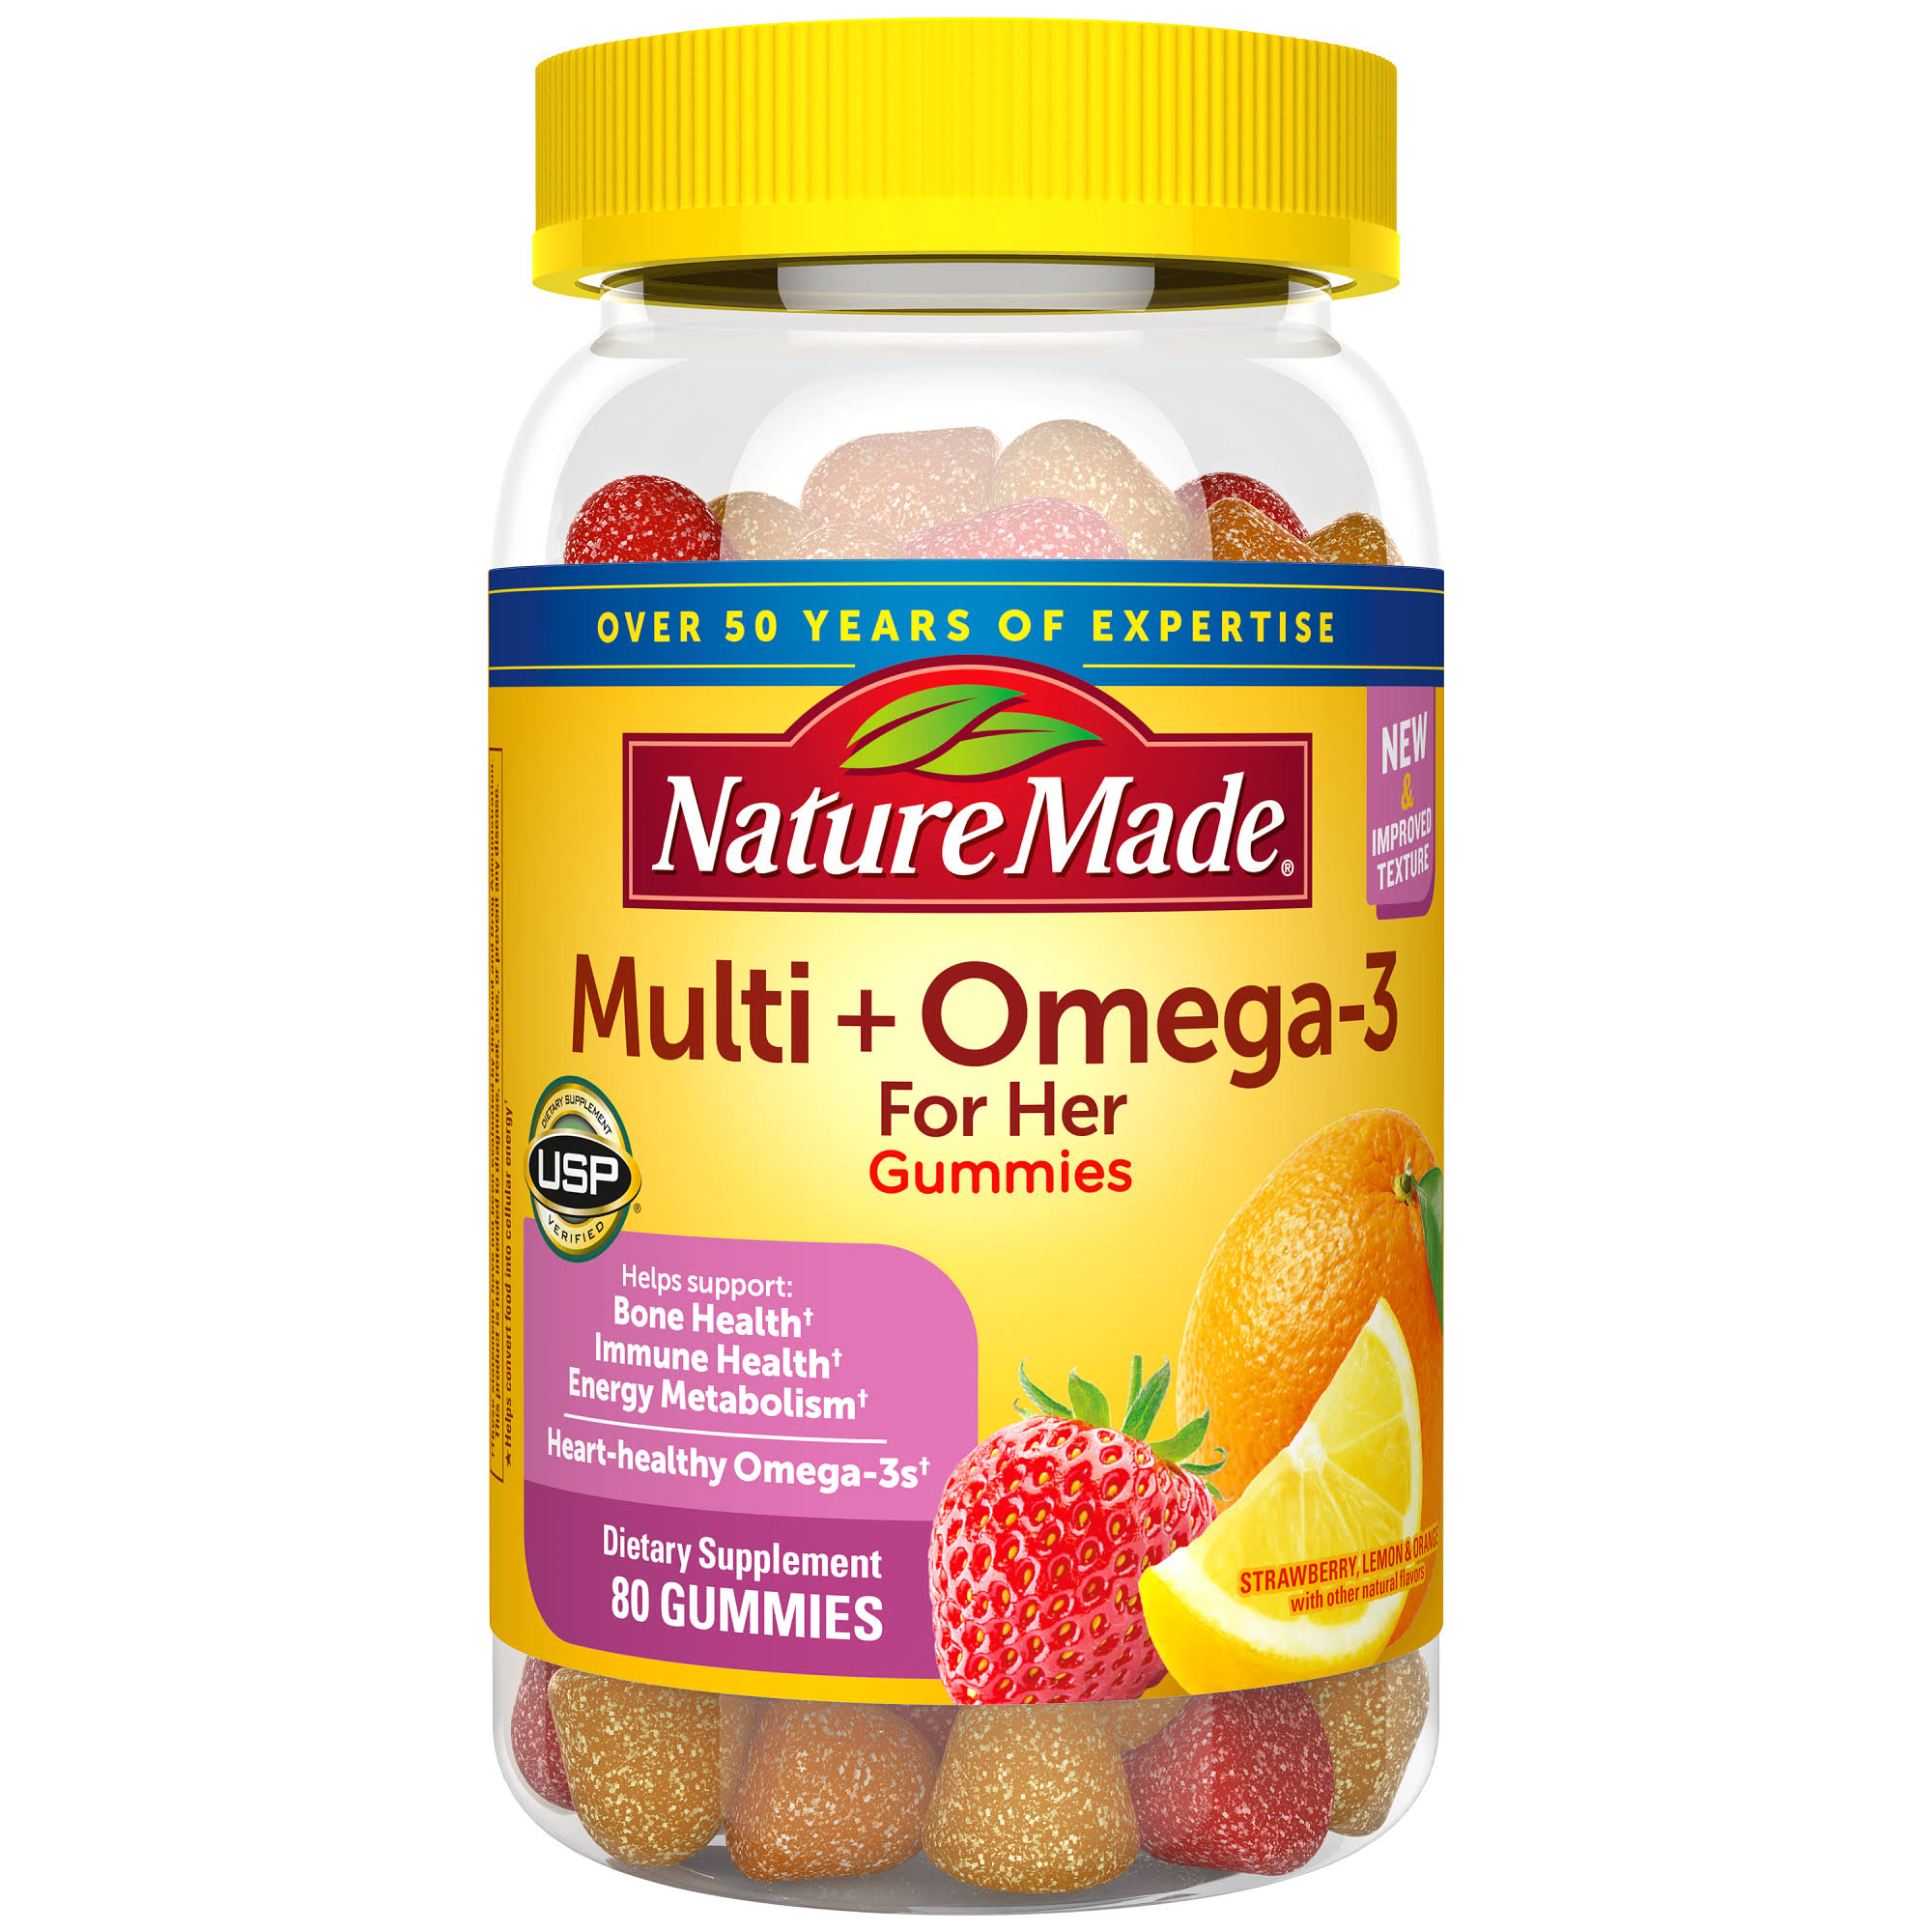 Nature Made Multi For Her Plus Omega-3 Adult Gummies Dietary Supplement - 80ct